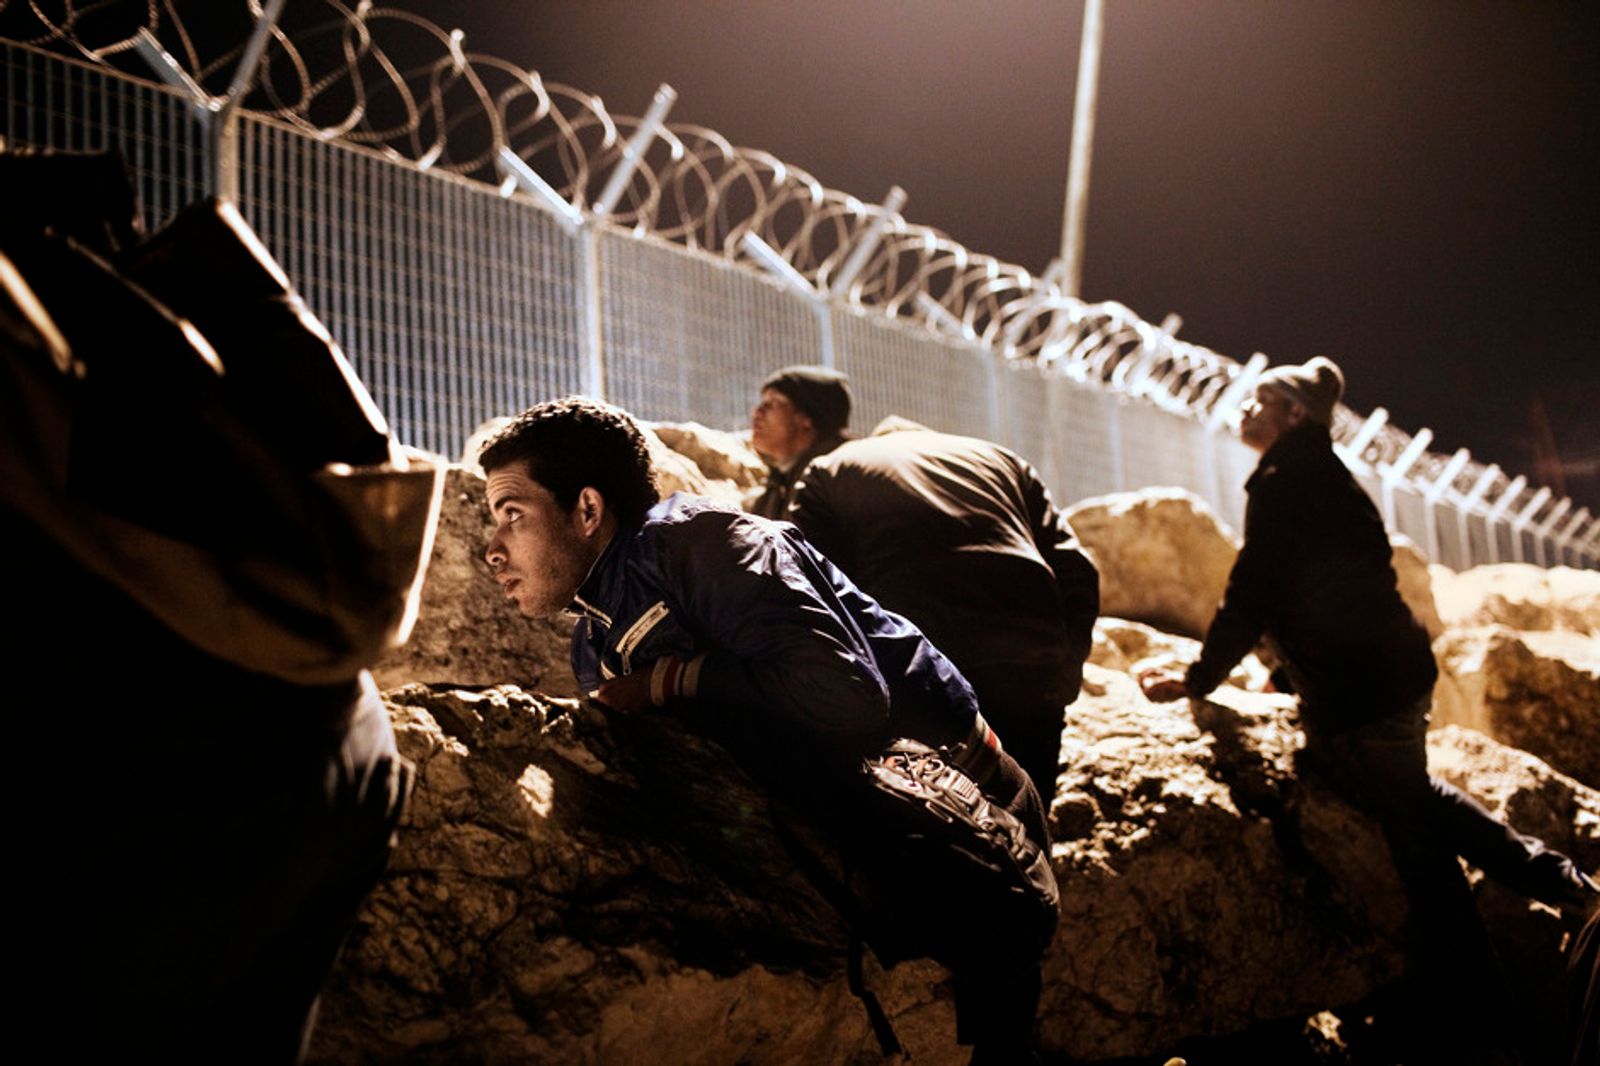 © Alessandro Penso - Image from the Lost Generation: Youth Migrants in Greece photography project